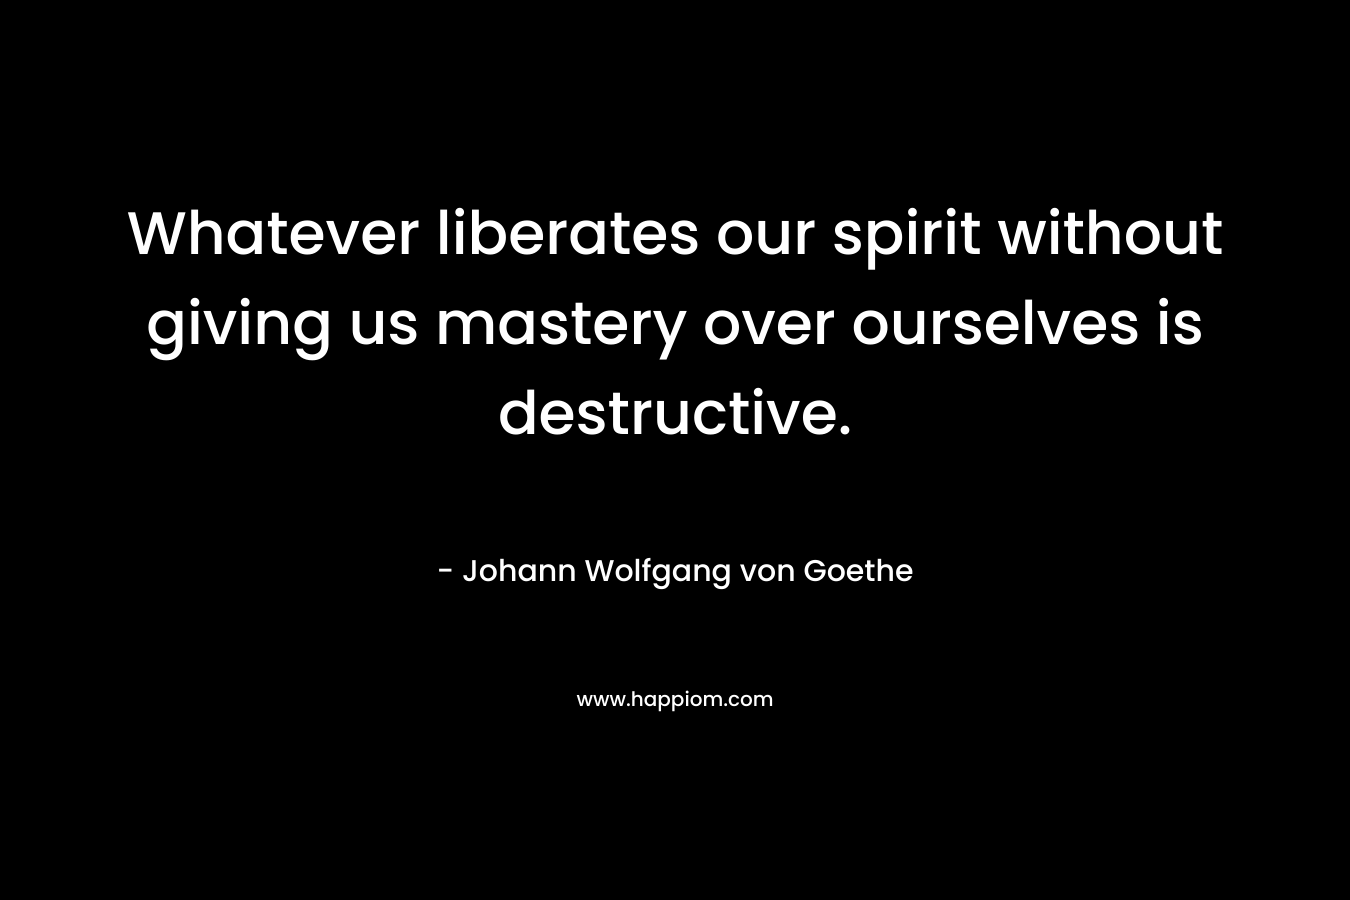 Whatever liberates our spirit without giving us mastery over ourselves is destructive.